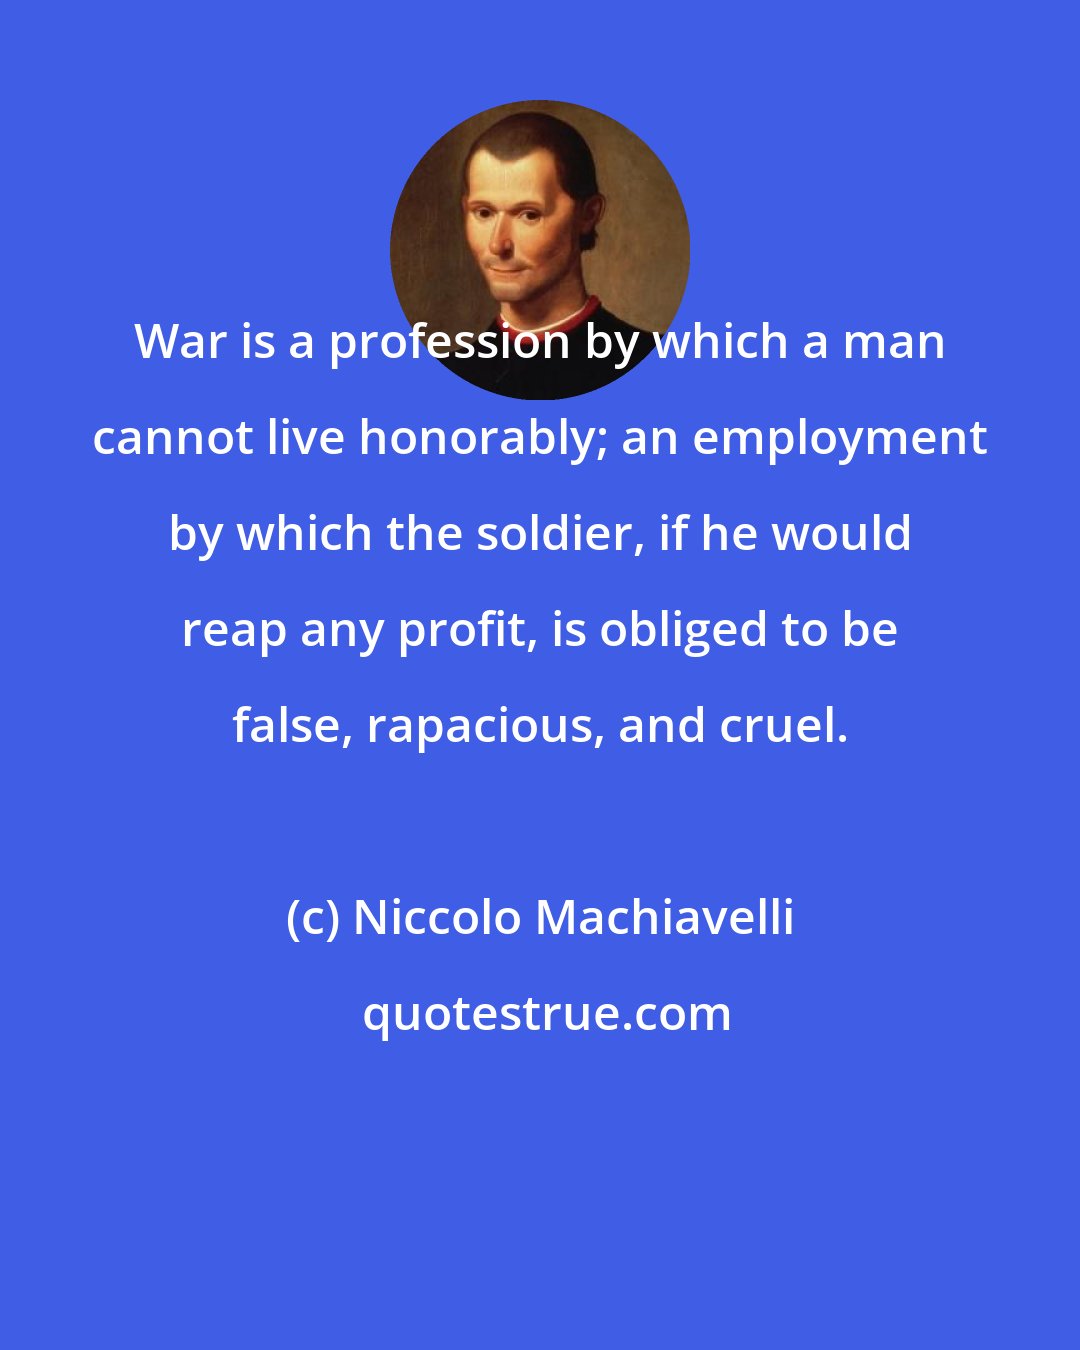 Niccolo Machiavelli: War is a profession by which a man cannot live honorably; an employment by which the soldier, if he would reap any profit, is obliged to be false, rapacious, and cruel.